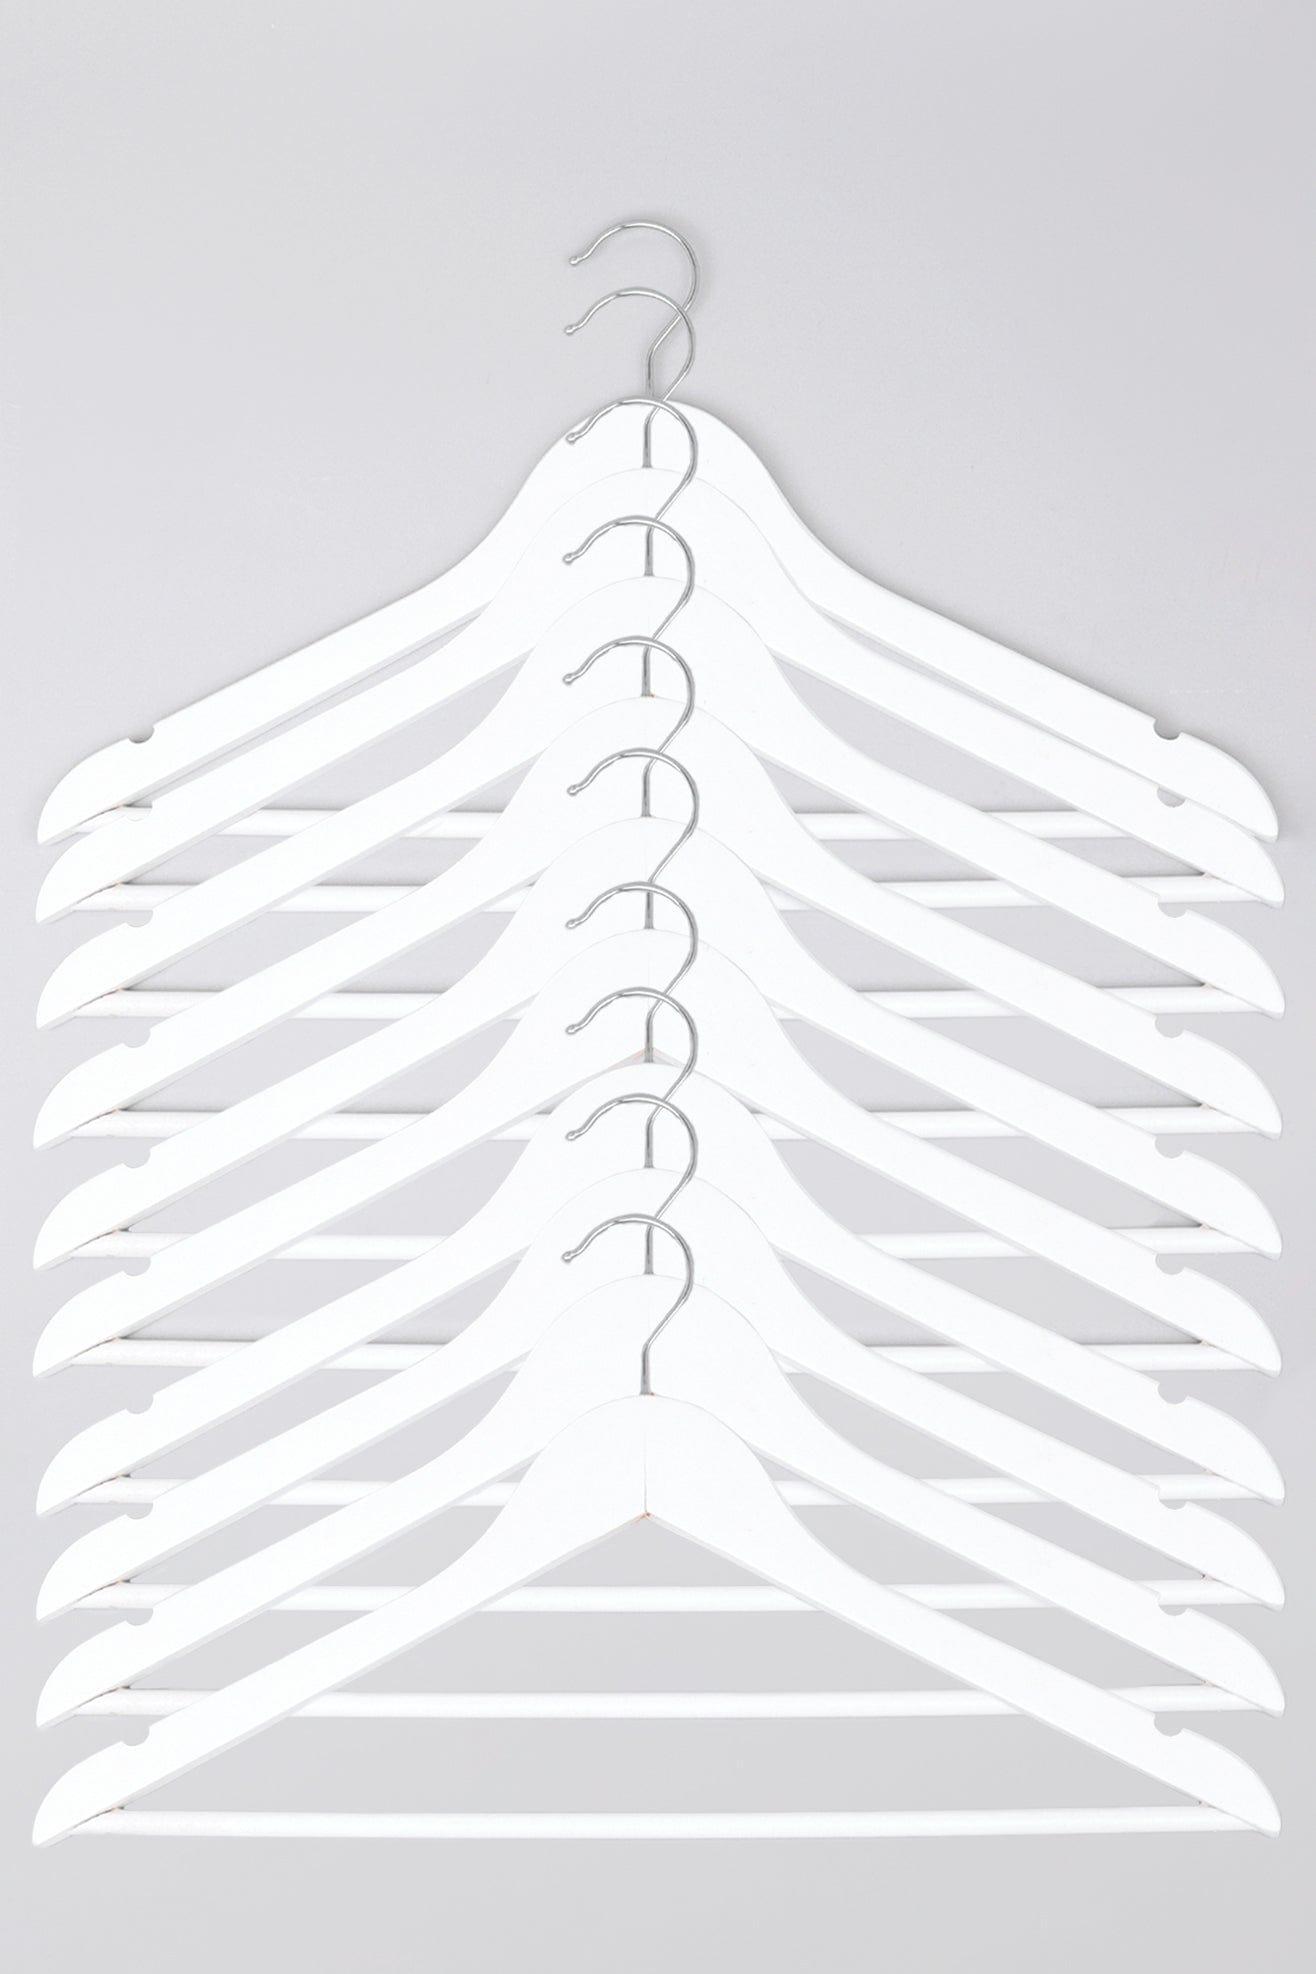 G Decor Hangers White Set of 10 White Wooden Notched Chrome Hook Clothes Hangers